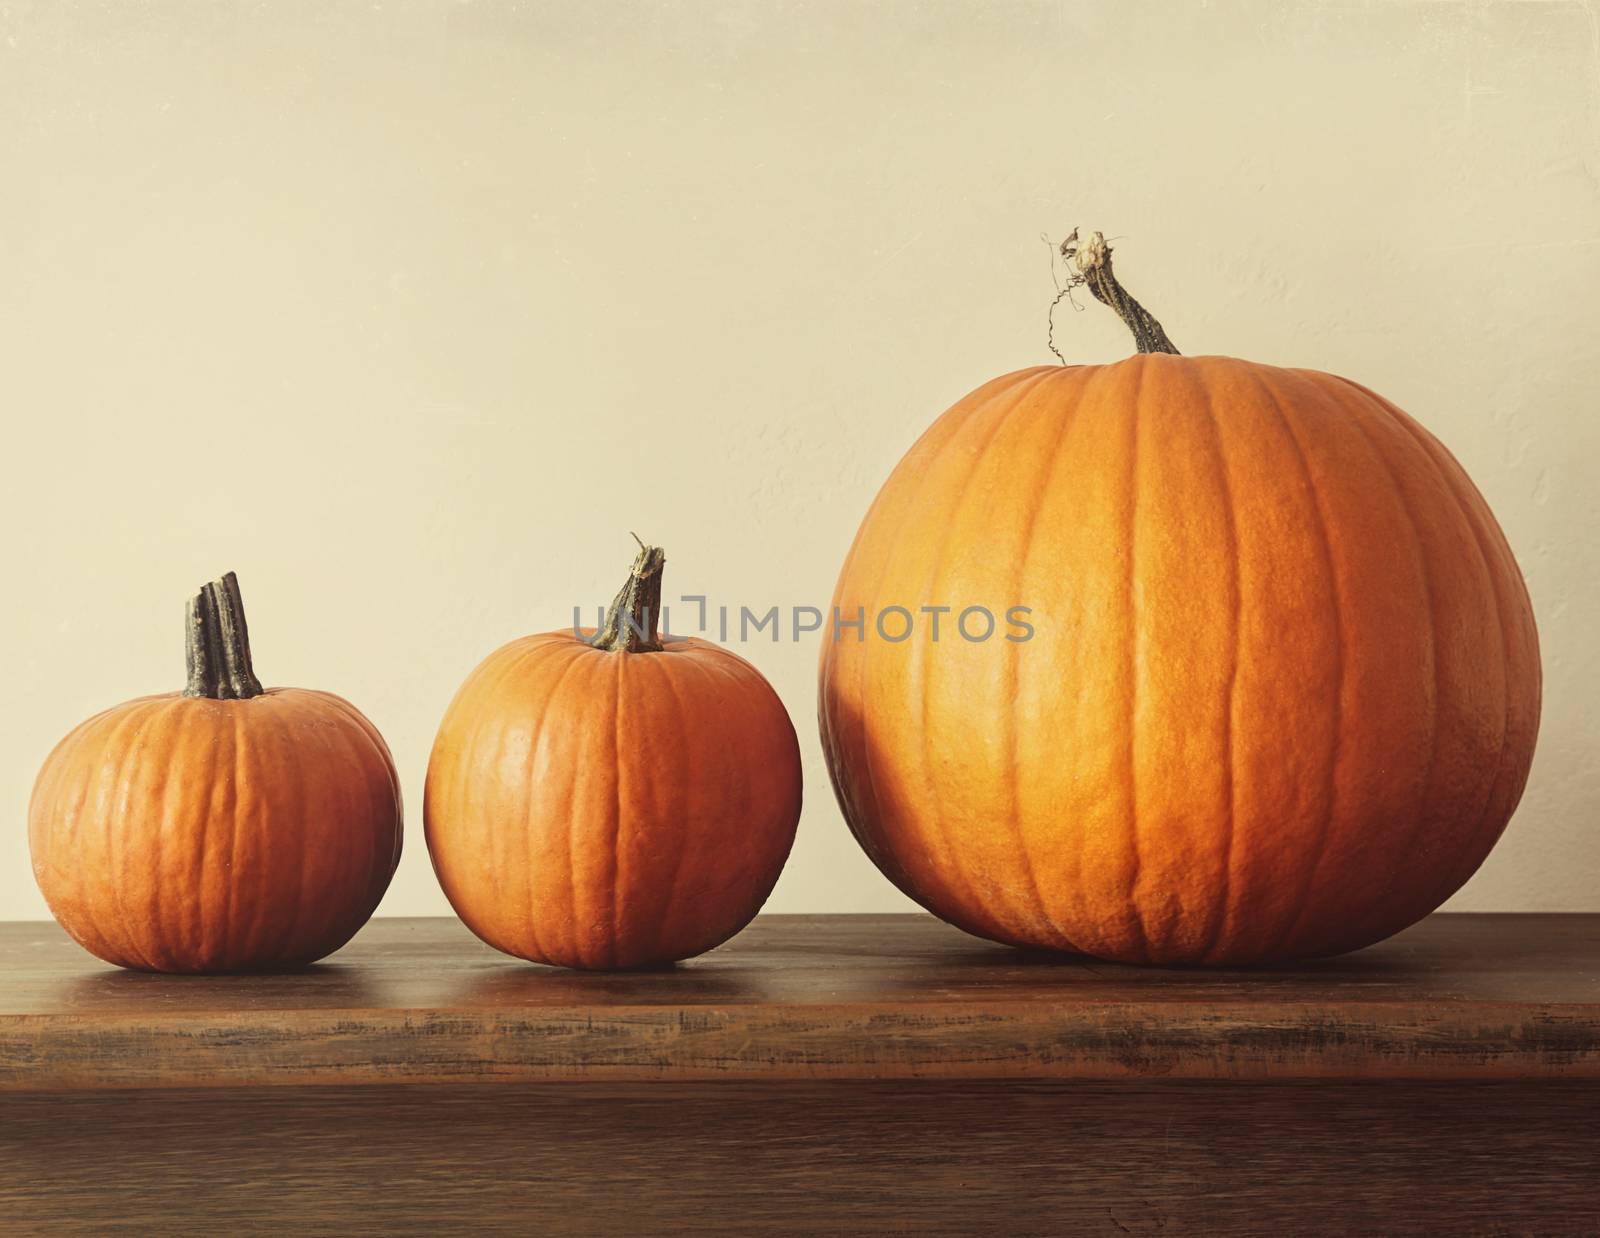 Pumpkins on a table fro Halloween